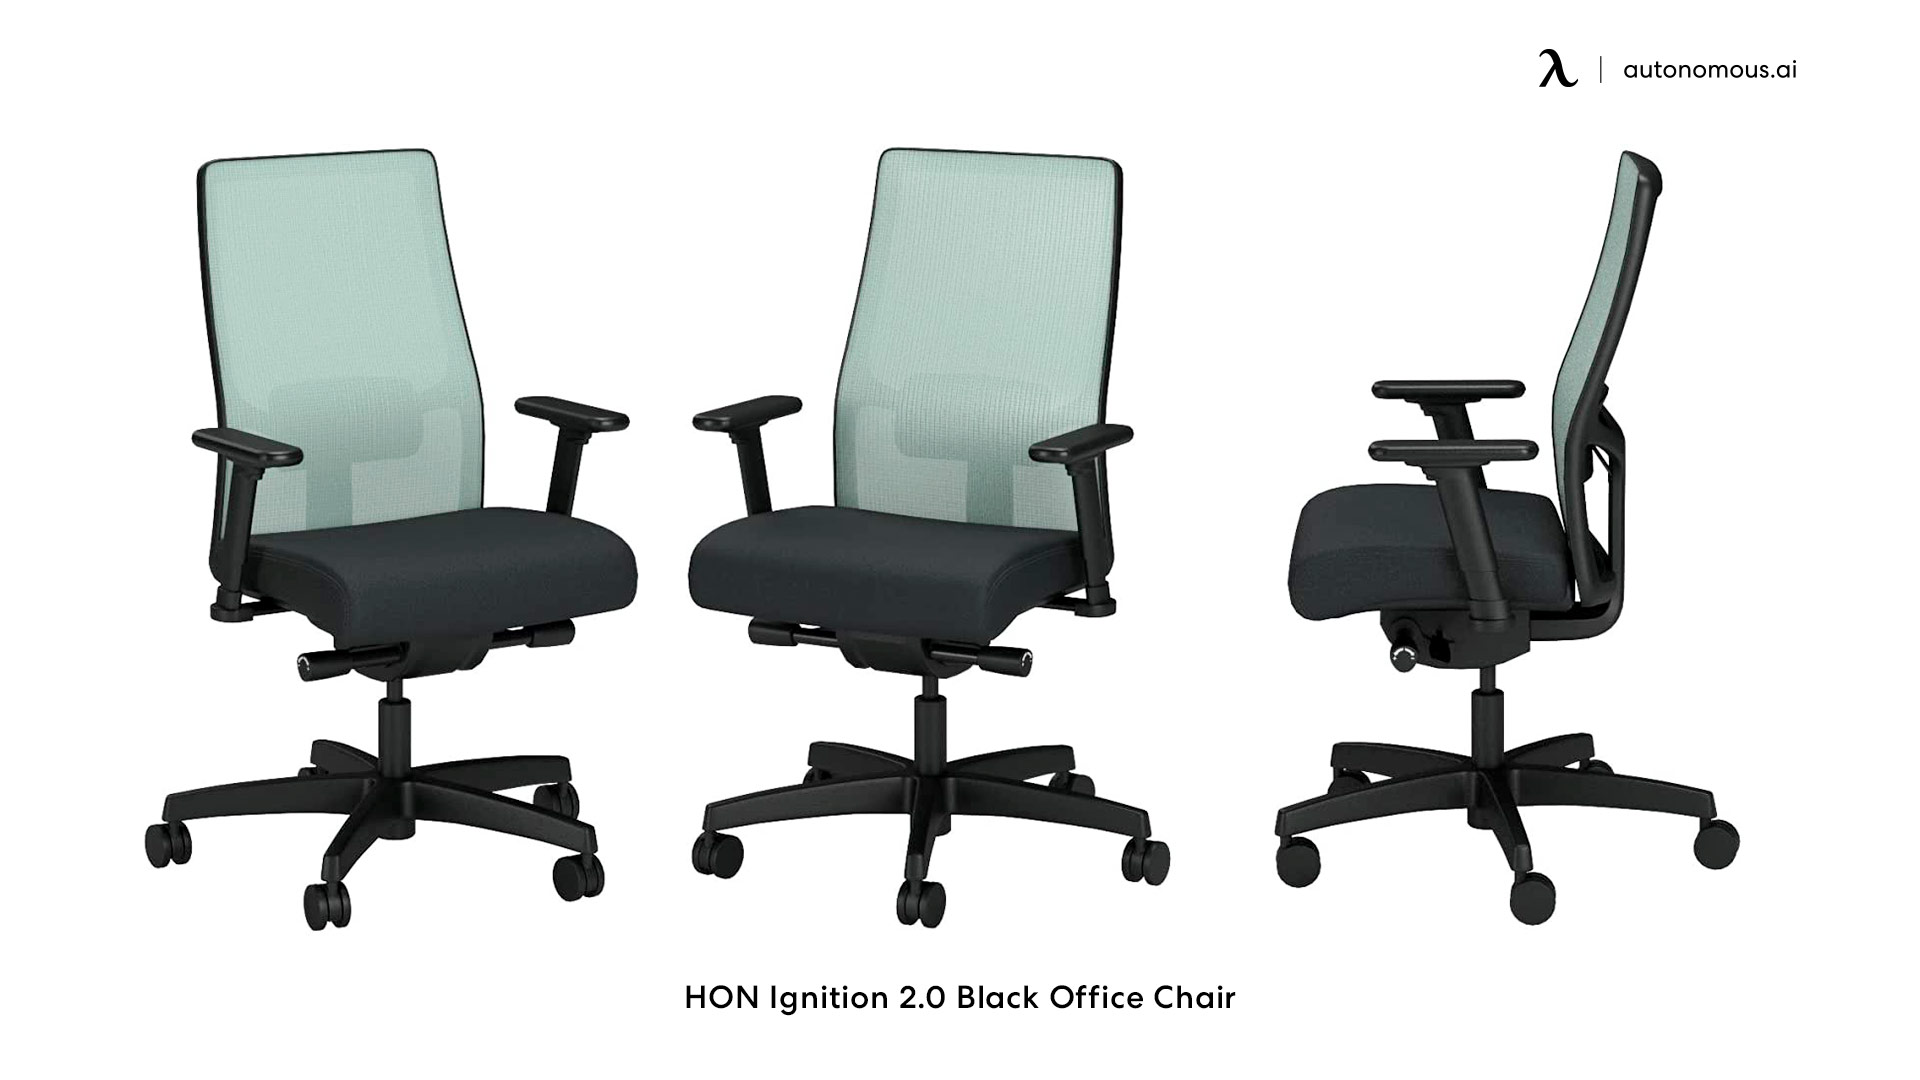 HON Ignition Office Chair